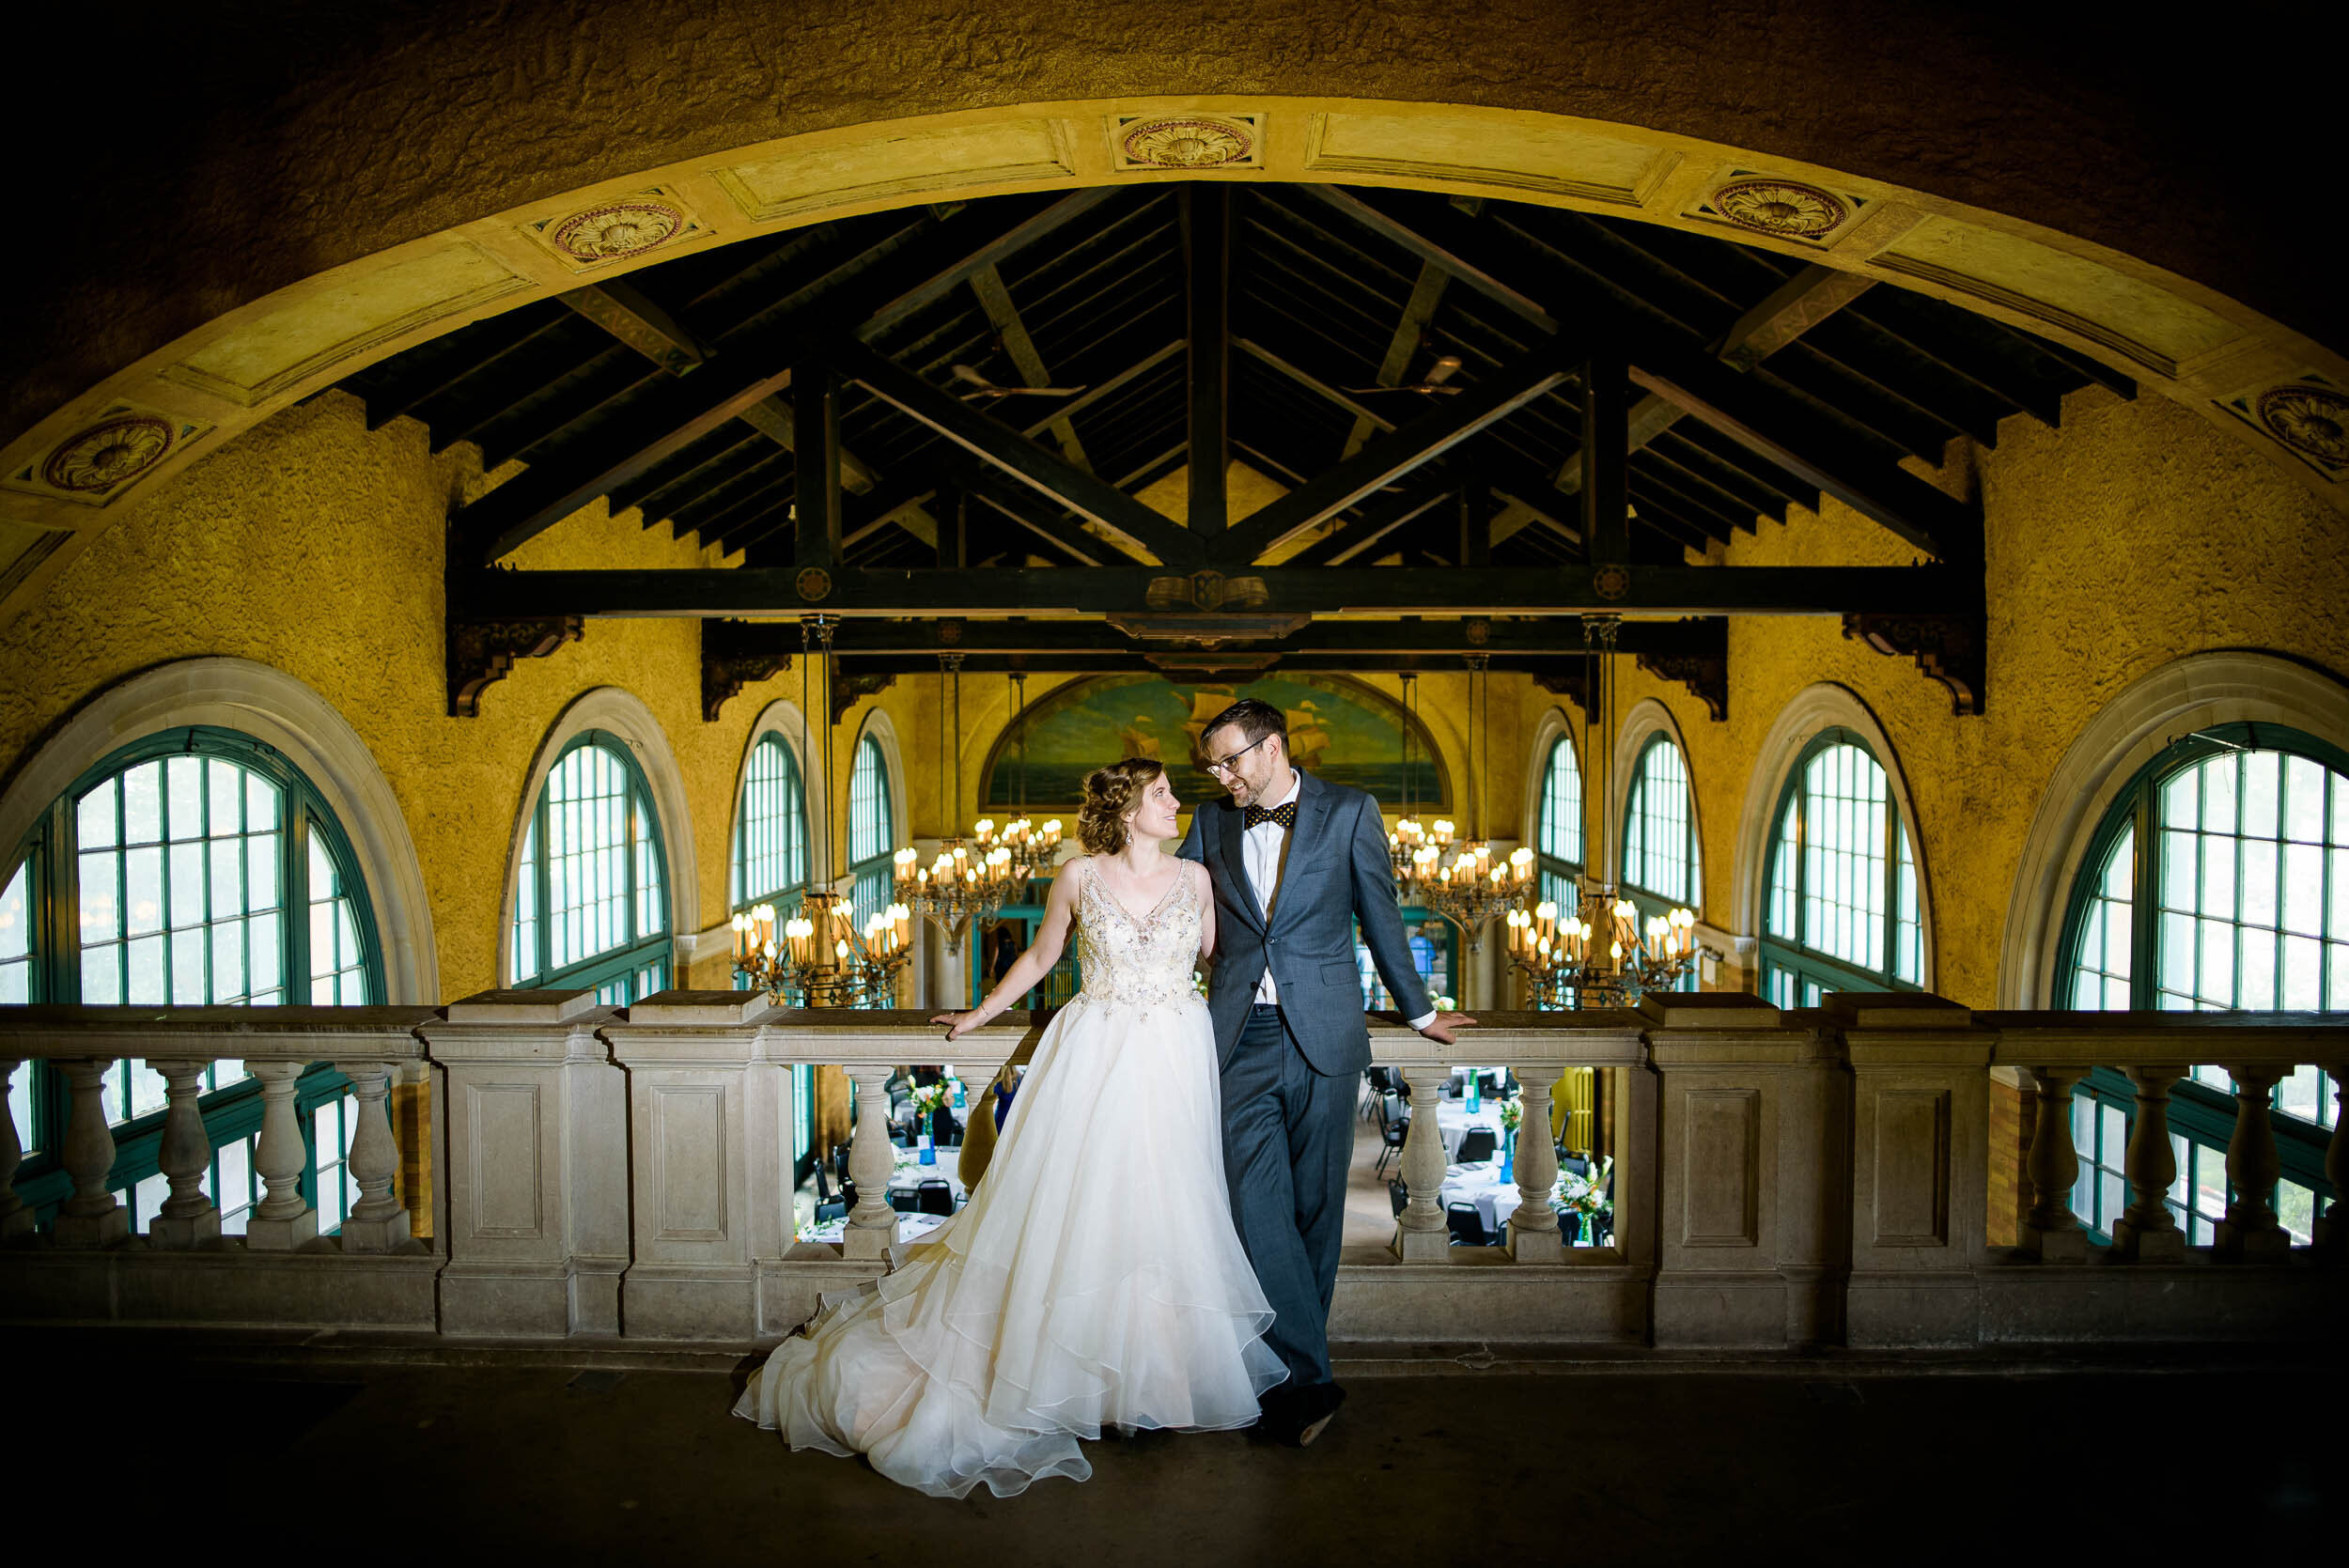 Creative indoor portrait of the bride and groom: Columbus Park Refectory Chicago wedding captured by J. Brown Photography.